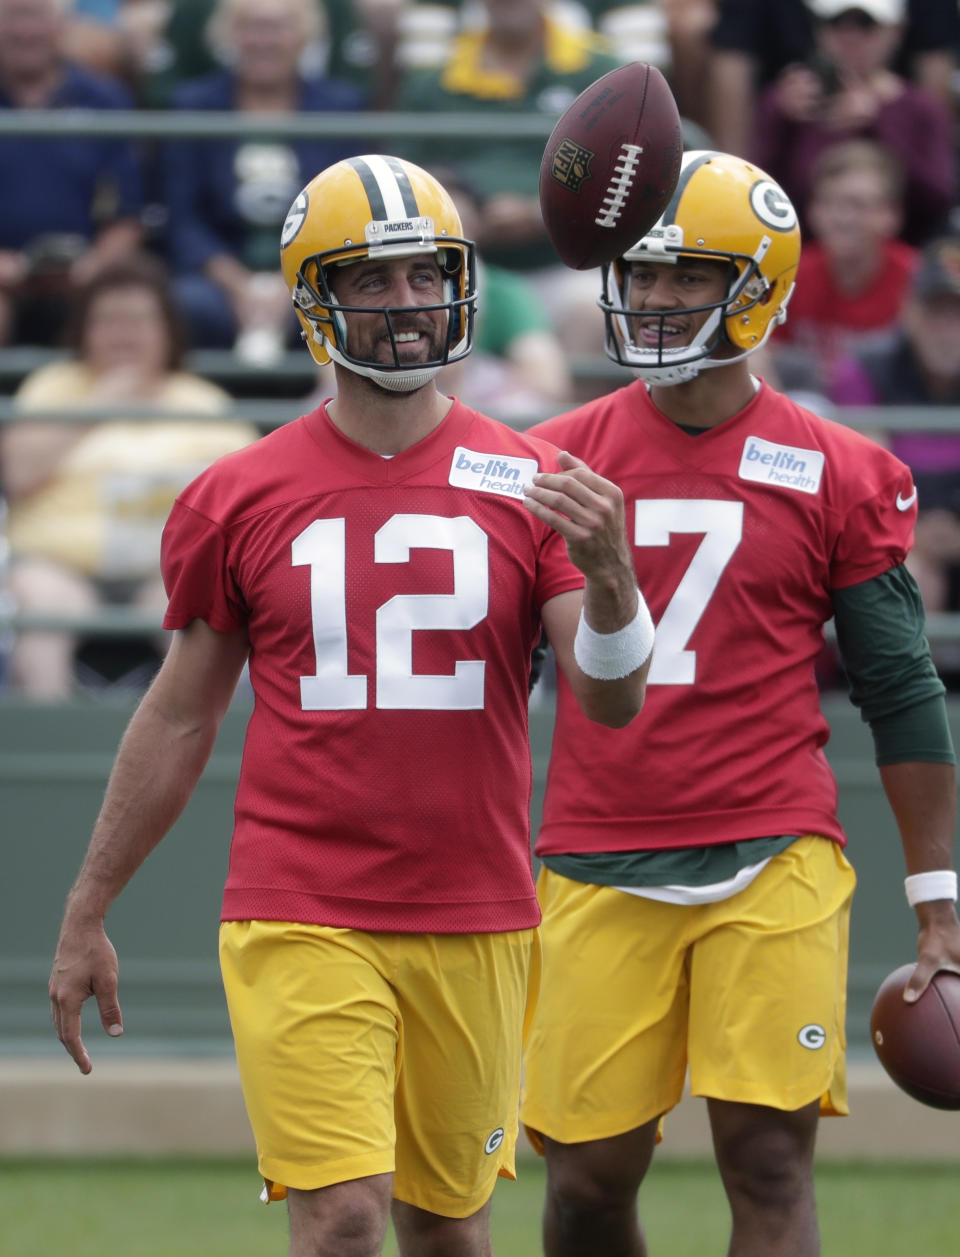 FILE - In this July 26, 2018, file photo, Green Bay Packers' Aaron Rodgers smiles during NFL football training camp, in Green Bay, Wis. Tom Brady tops The Associated Press rankings of NFL quarterbacks at age 41. It’s the second straight season the New England Patriots’ star has edged Green Bay quarterback Aaron Rodgers, although Rodgers closed the gap this year. Brady is the league’s reigning MVP and coming off a record eighth trip to the Super Bowl while Rodgers is coming back from a shoulder injury that knocked him out for half of the 2017 season. (AP Photo/Morry Gash, File)